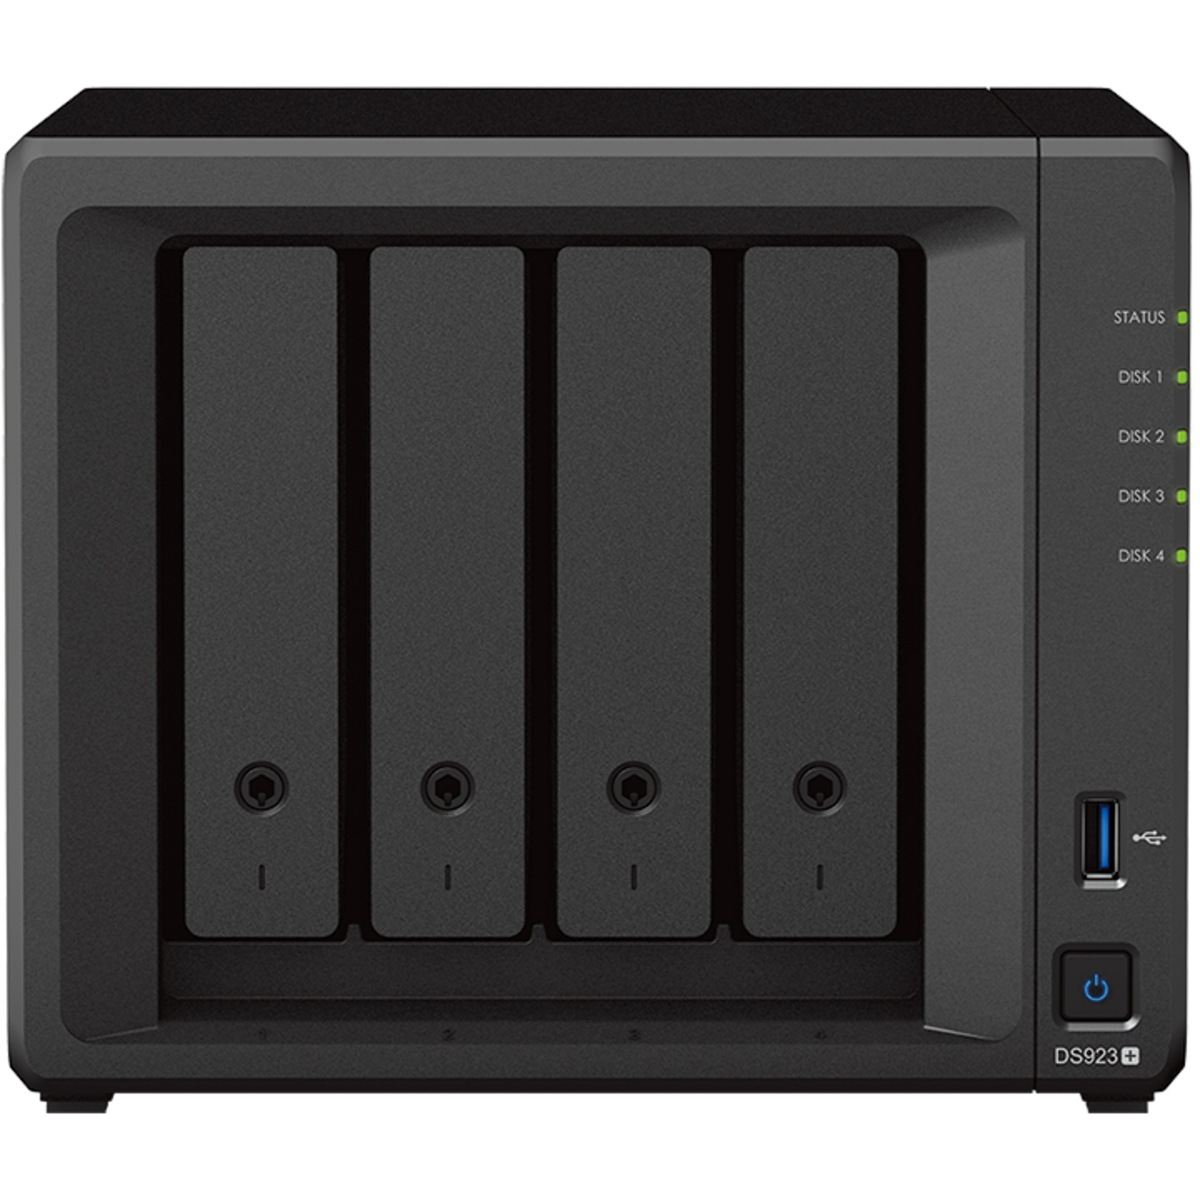 Synology DiskStation DS923+ 72tb 4-Bay Desktop Multimedia / Power User / Business NAS - Network Attached Storage Device 4x18tb Seagate IronWolf Pro ST18000NT001 3.5 7200rpm SATA 6Gb/s HDD NAS Class Drives Installed - Burn-In Tested - ON SALE - FREE RAM UPGRADE DiskStation DS923+